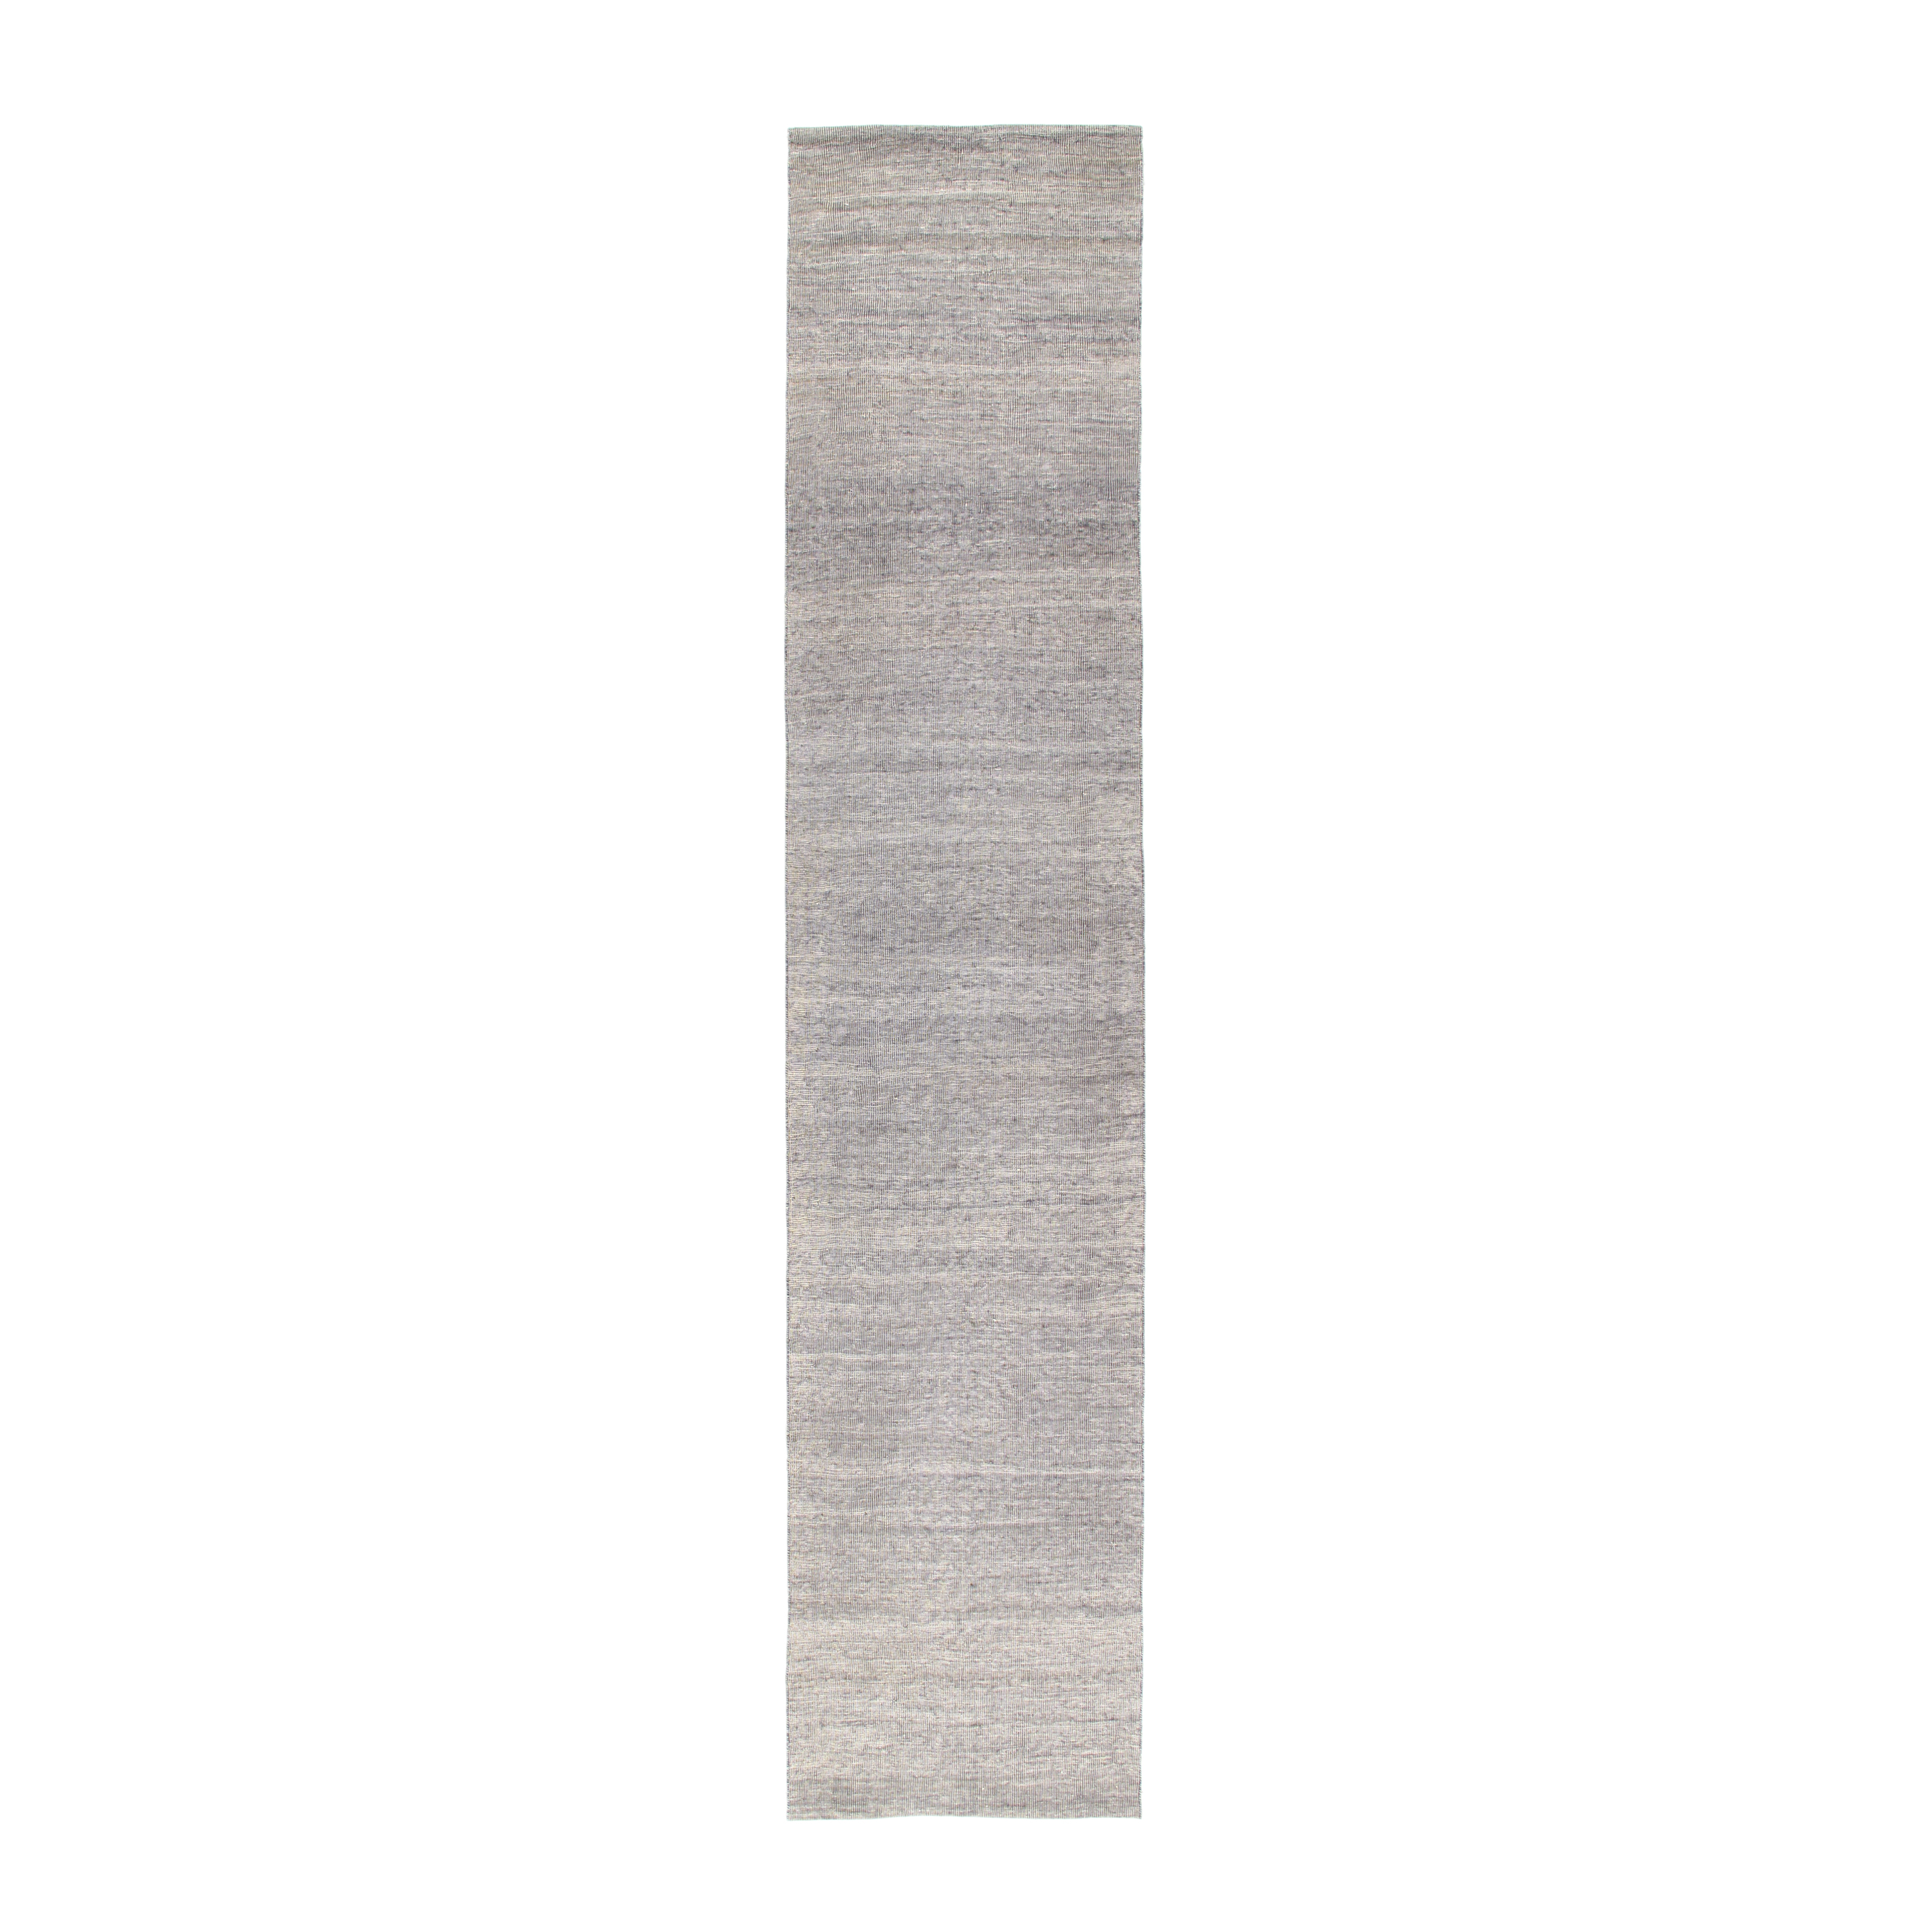 This flat-weave rug is made with 100% handspun, non-dyed or Natural dye Persian wool.